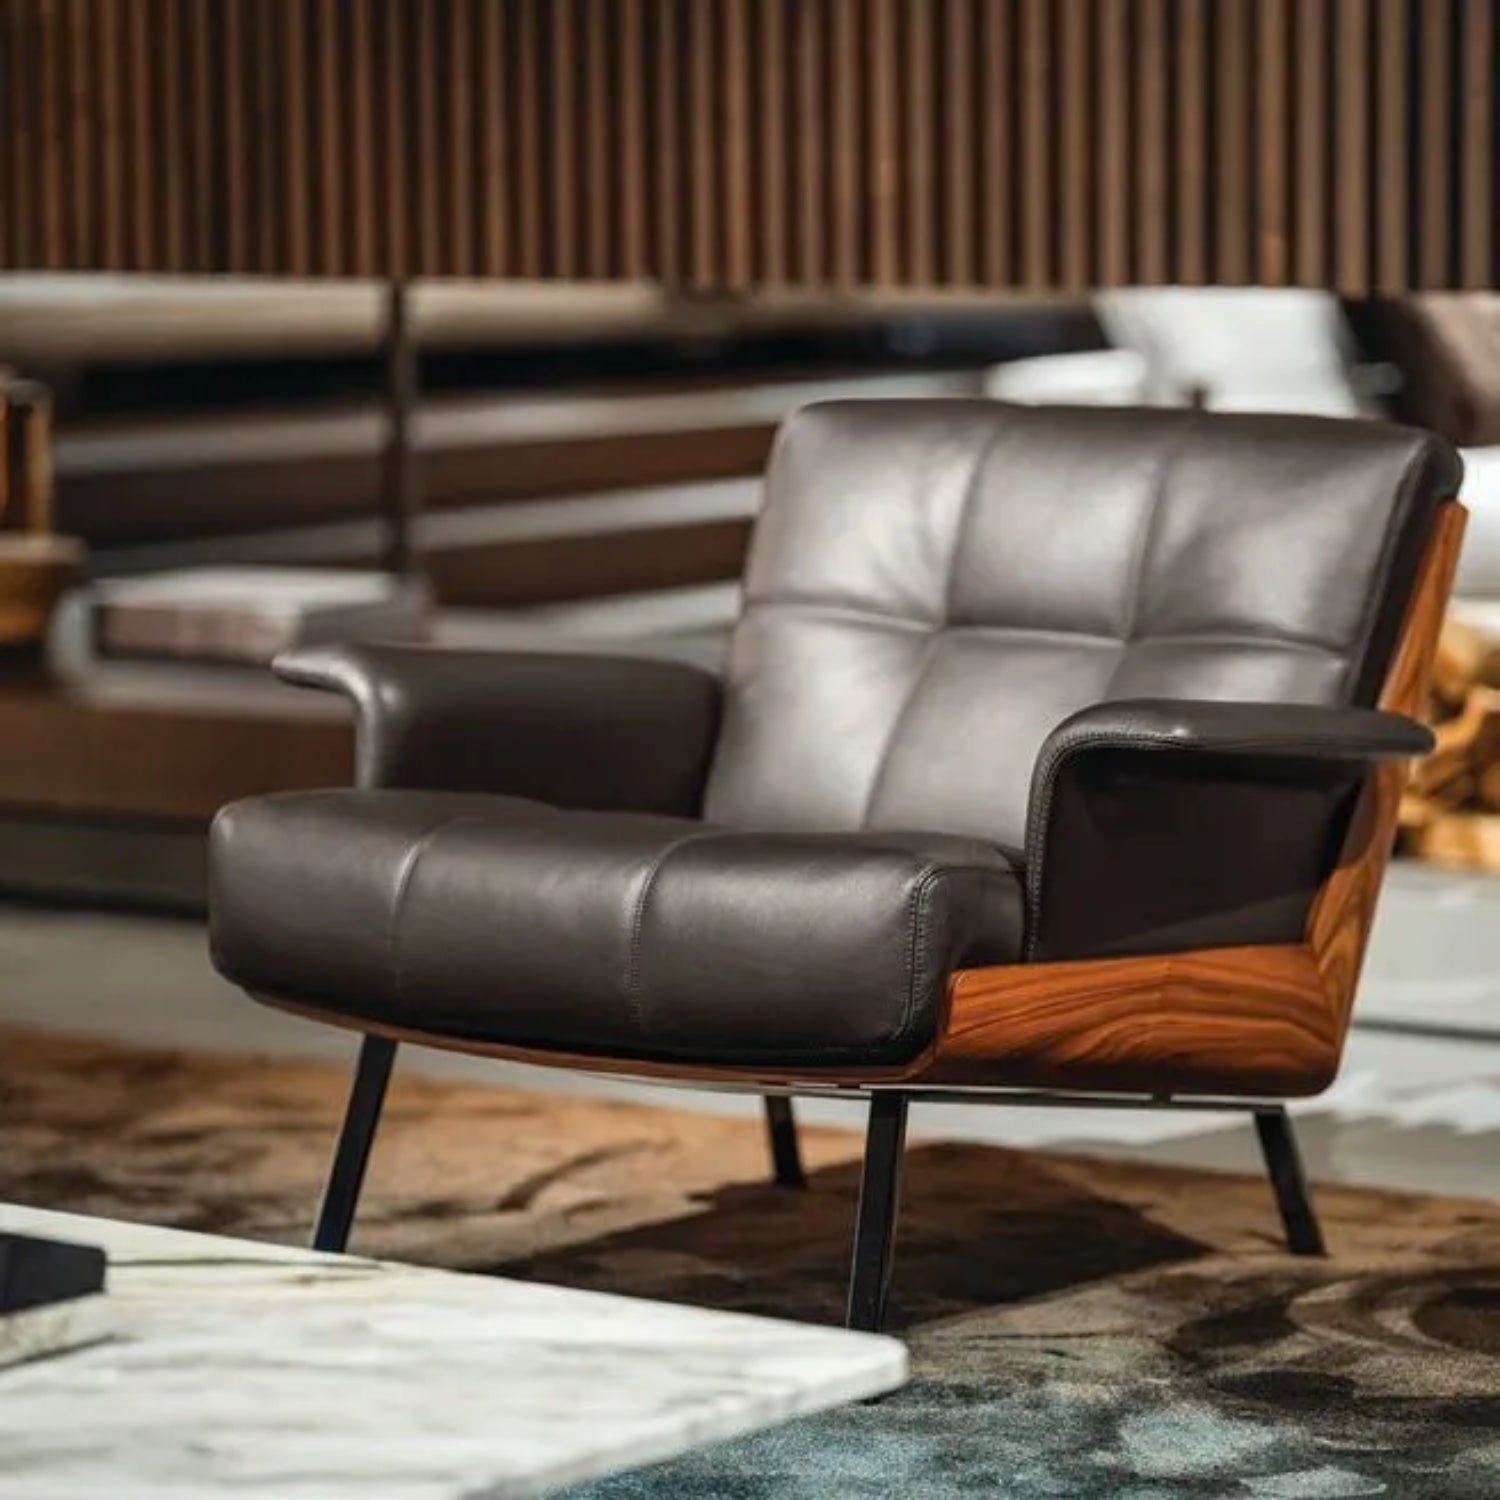 Replica Daiki sleek black leather lounge armchair in contemporary space. 